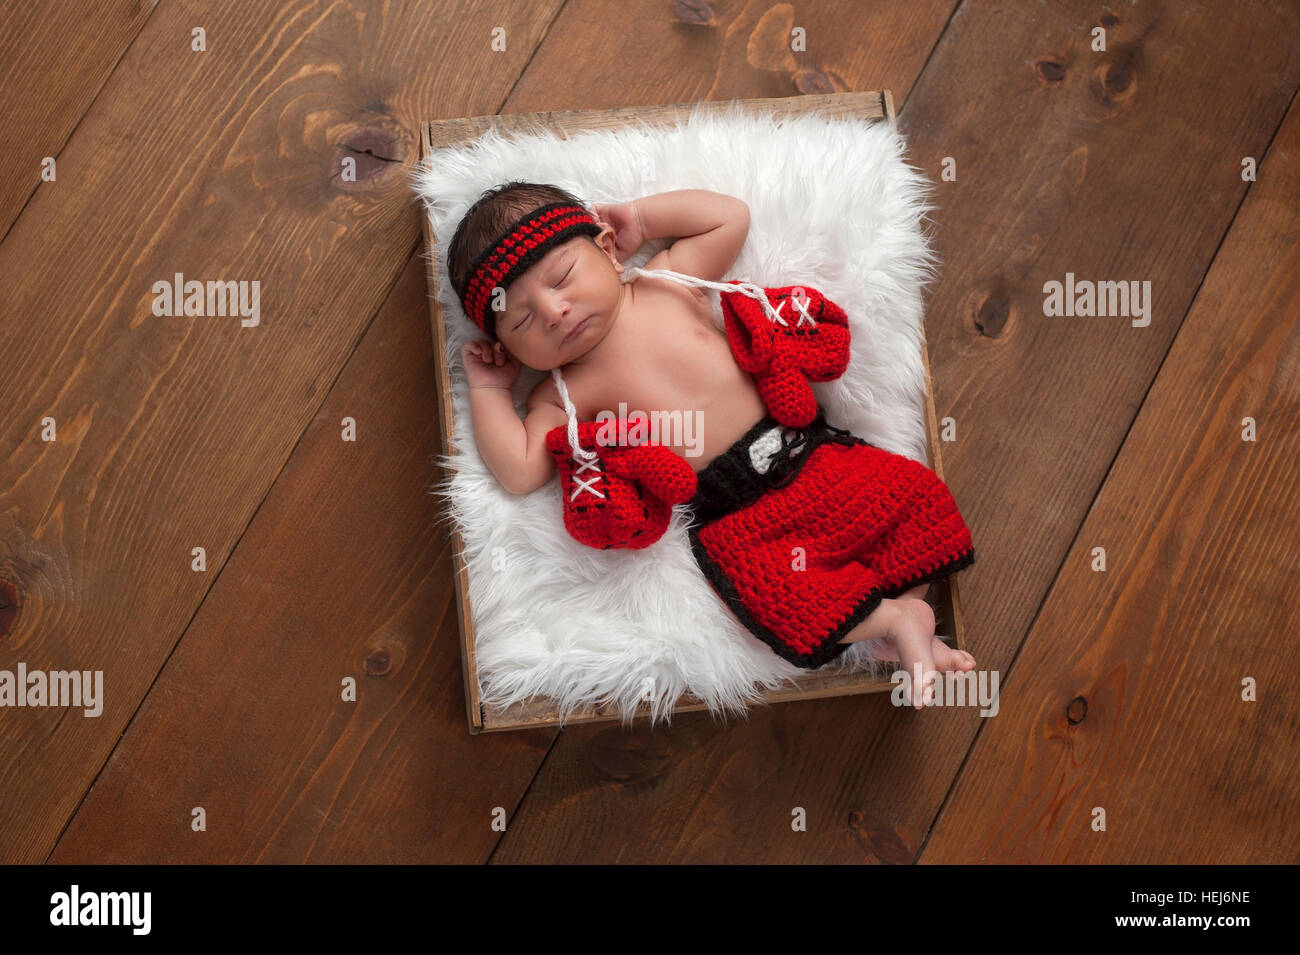 Eleven day old newborn baby boy wearing boxing shorts. He is lying in a wooden crate lined with white, faux fur and has boxing gloves draped around hi Stock Photo